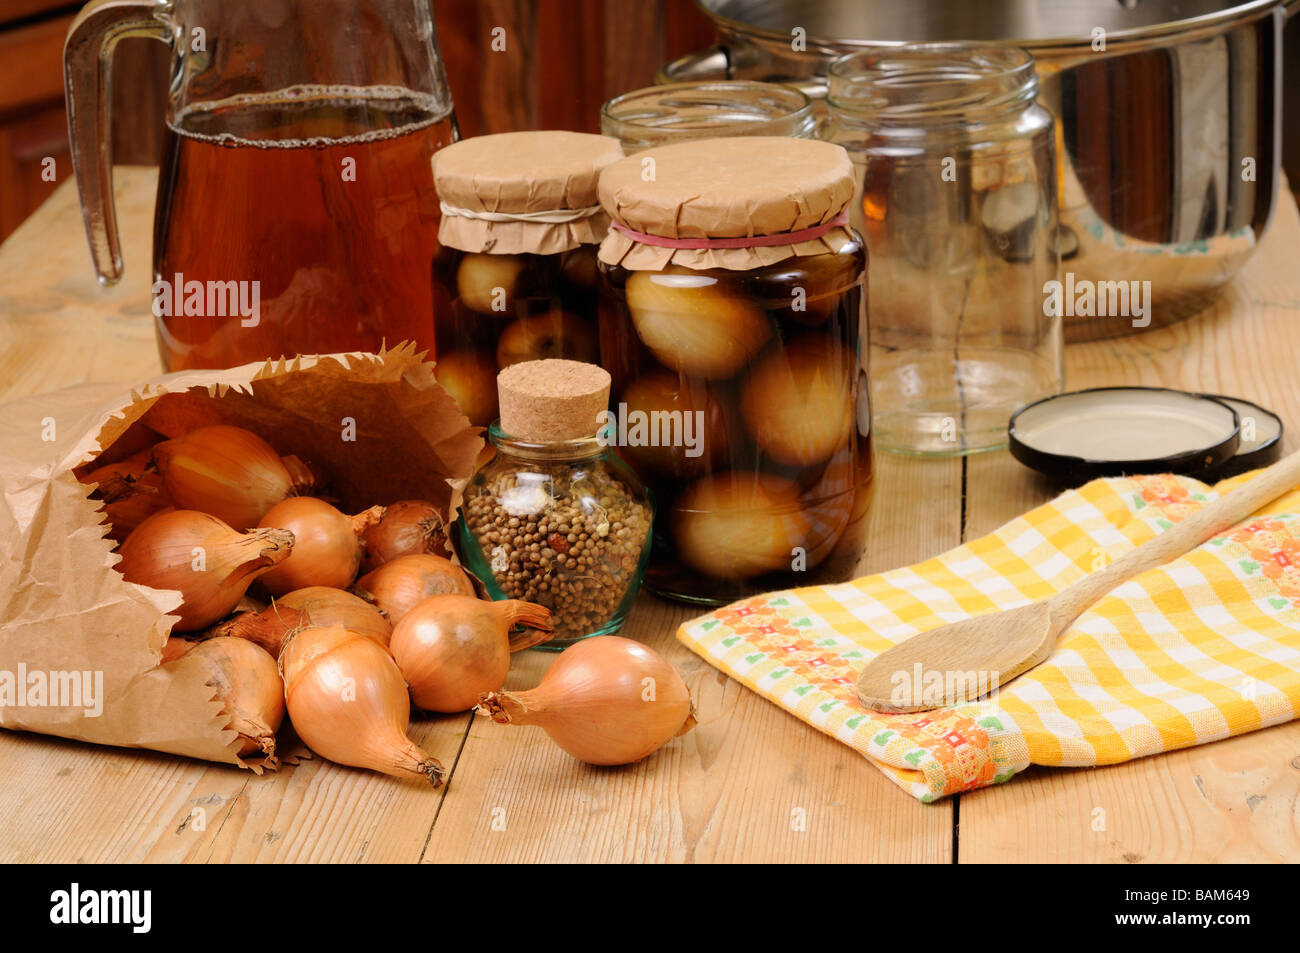 Country kitchen scene with home made jars of pickled onions Stock Photo